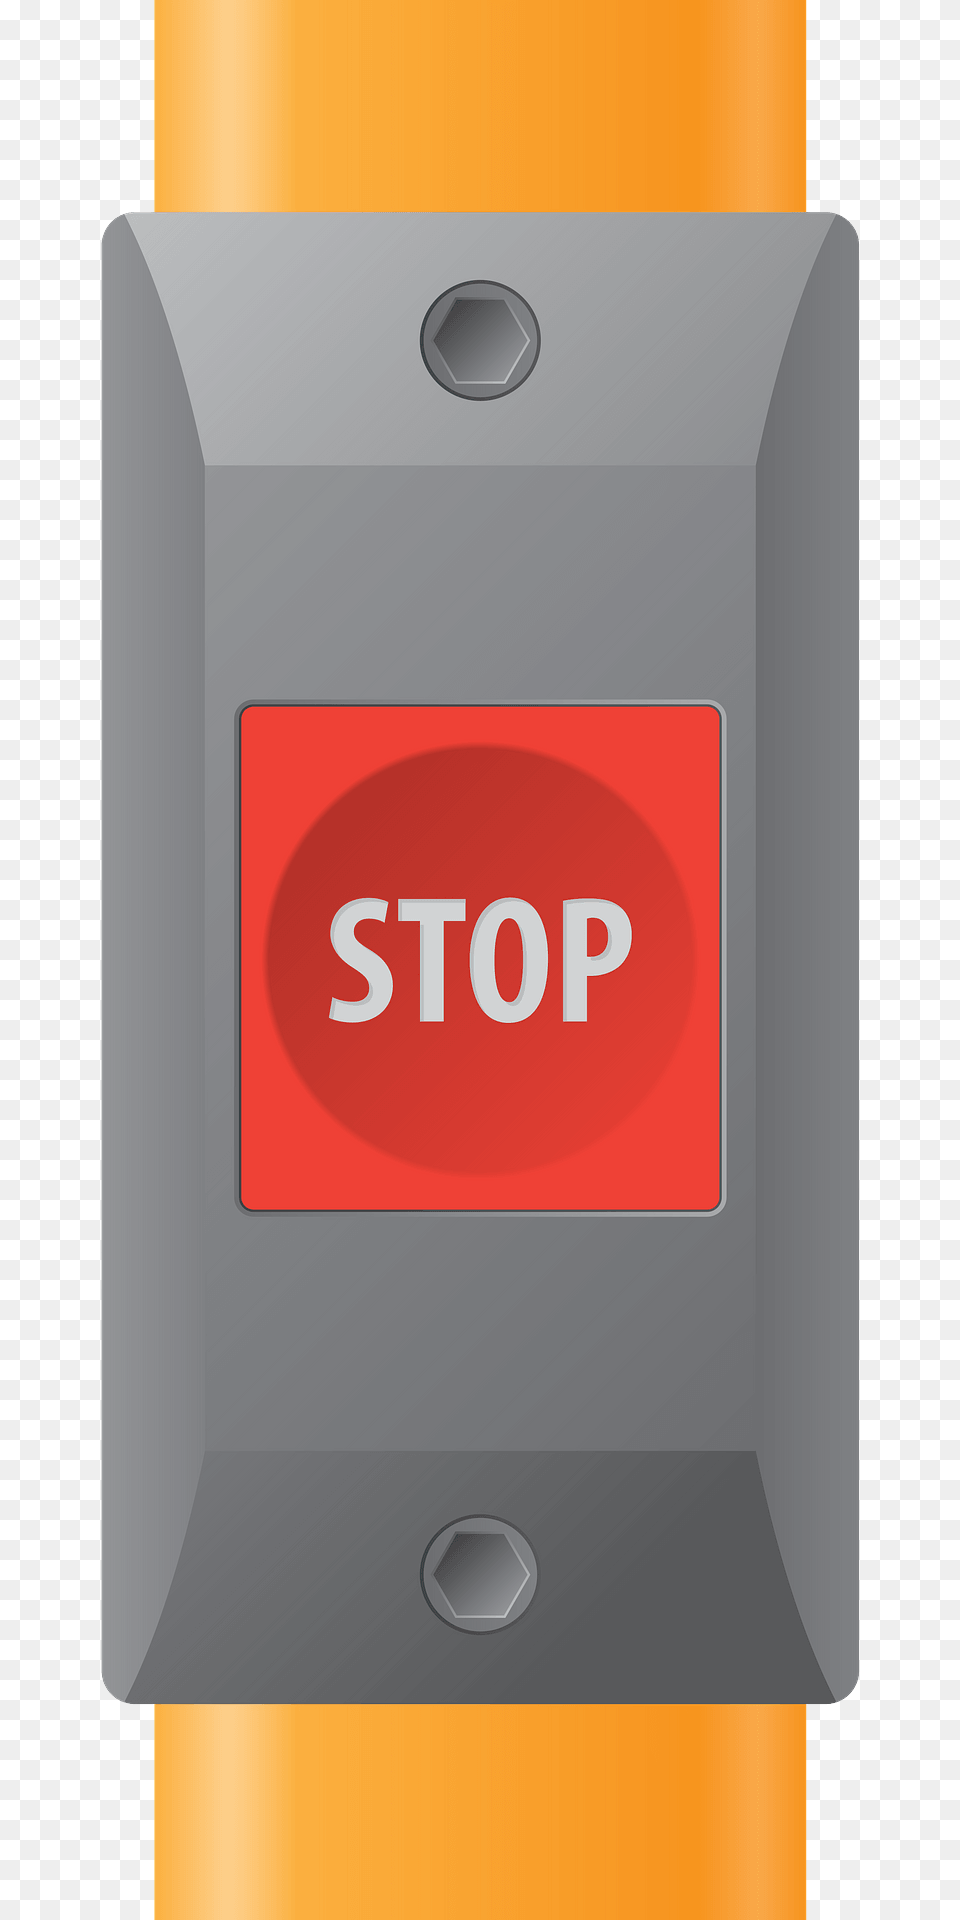 Bus Stop Button Clipart, Mailbox Png Image